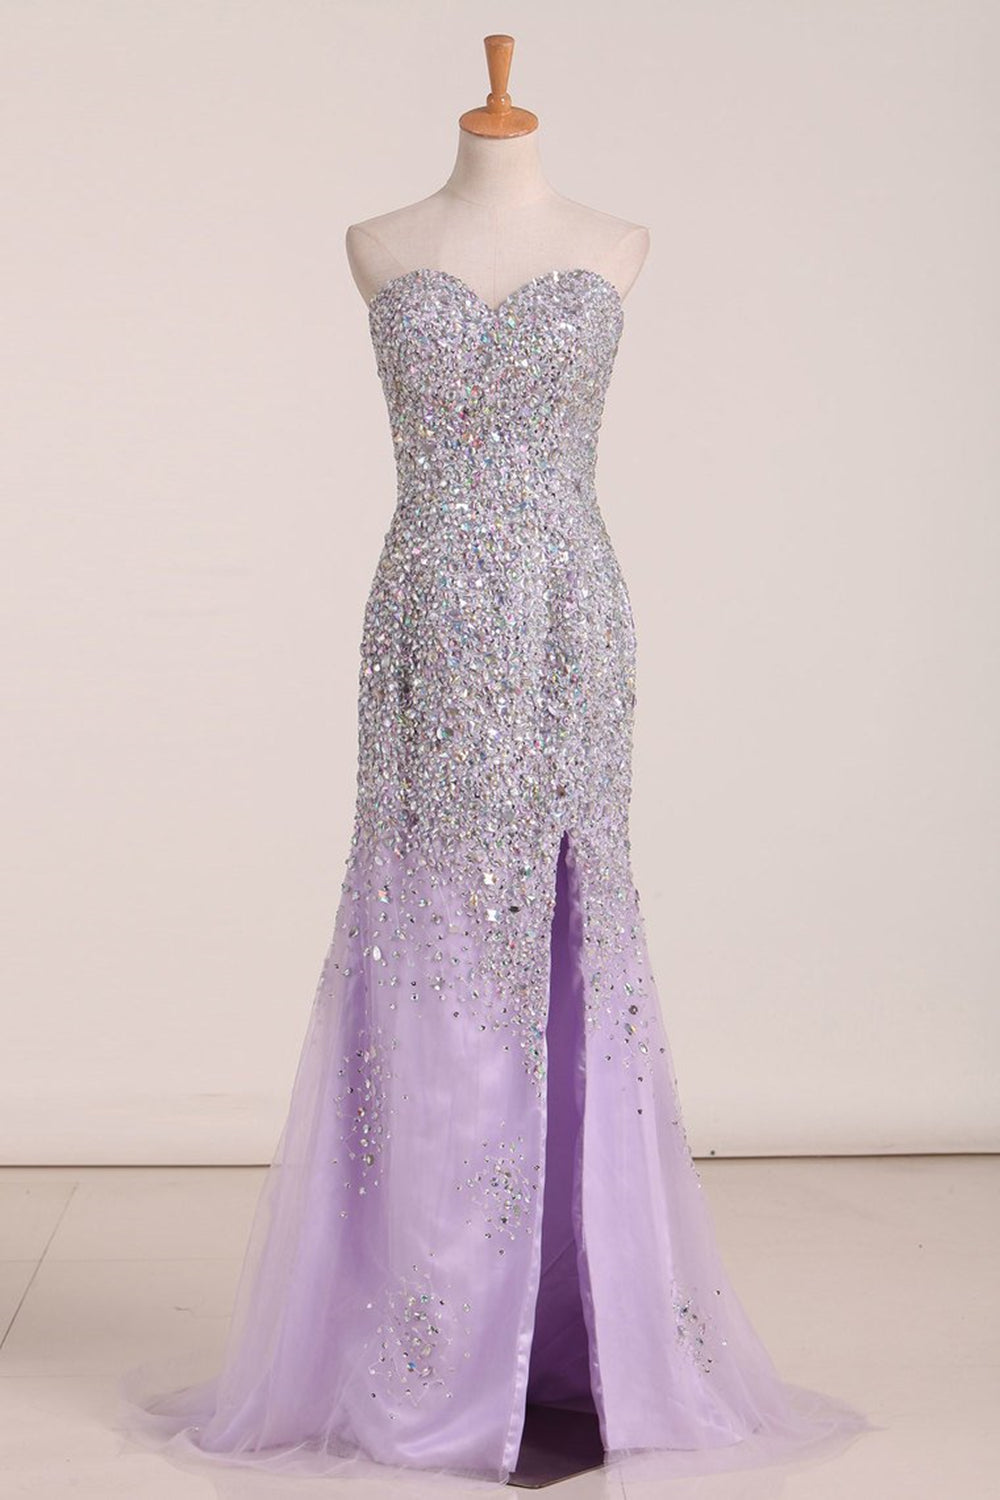 Gorgeous Mermaid Strapless Purple Beaded Long Prom Dresses, Mermaid Purple Beaded Formal Evening Dresses, Purple Ball Gown EP1437